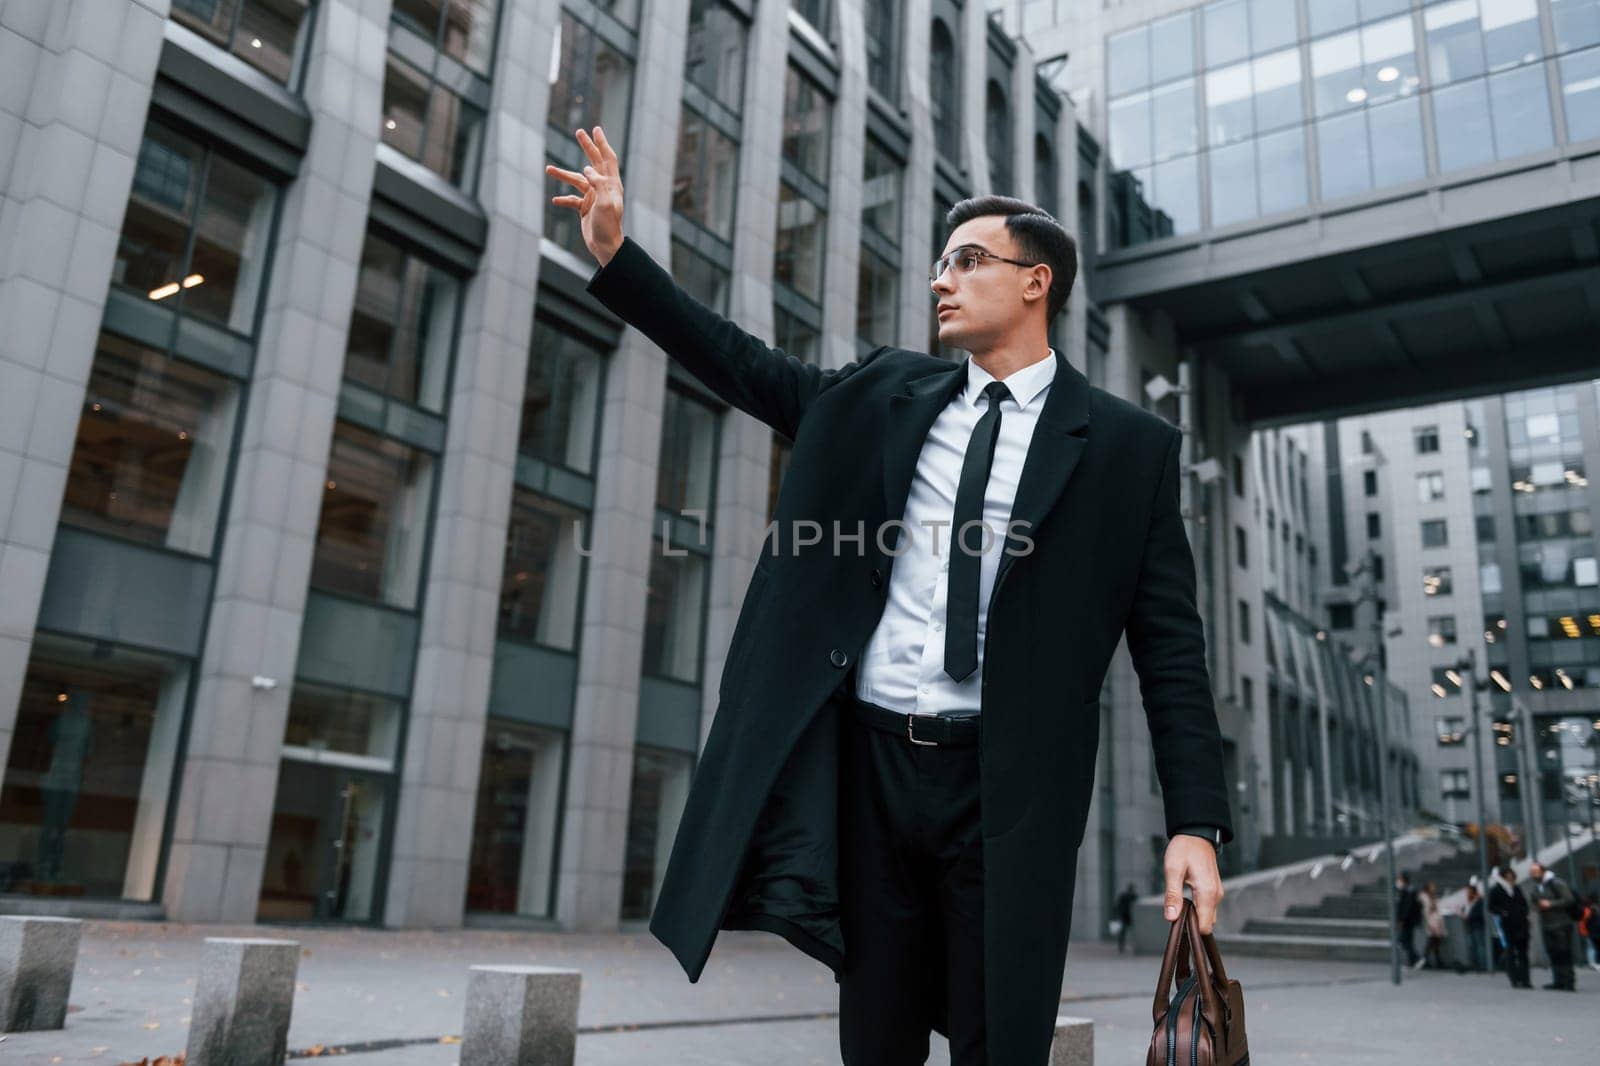 Raises his right hand. Businessman in black suit and tie is outdoors in the city.